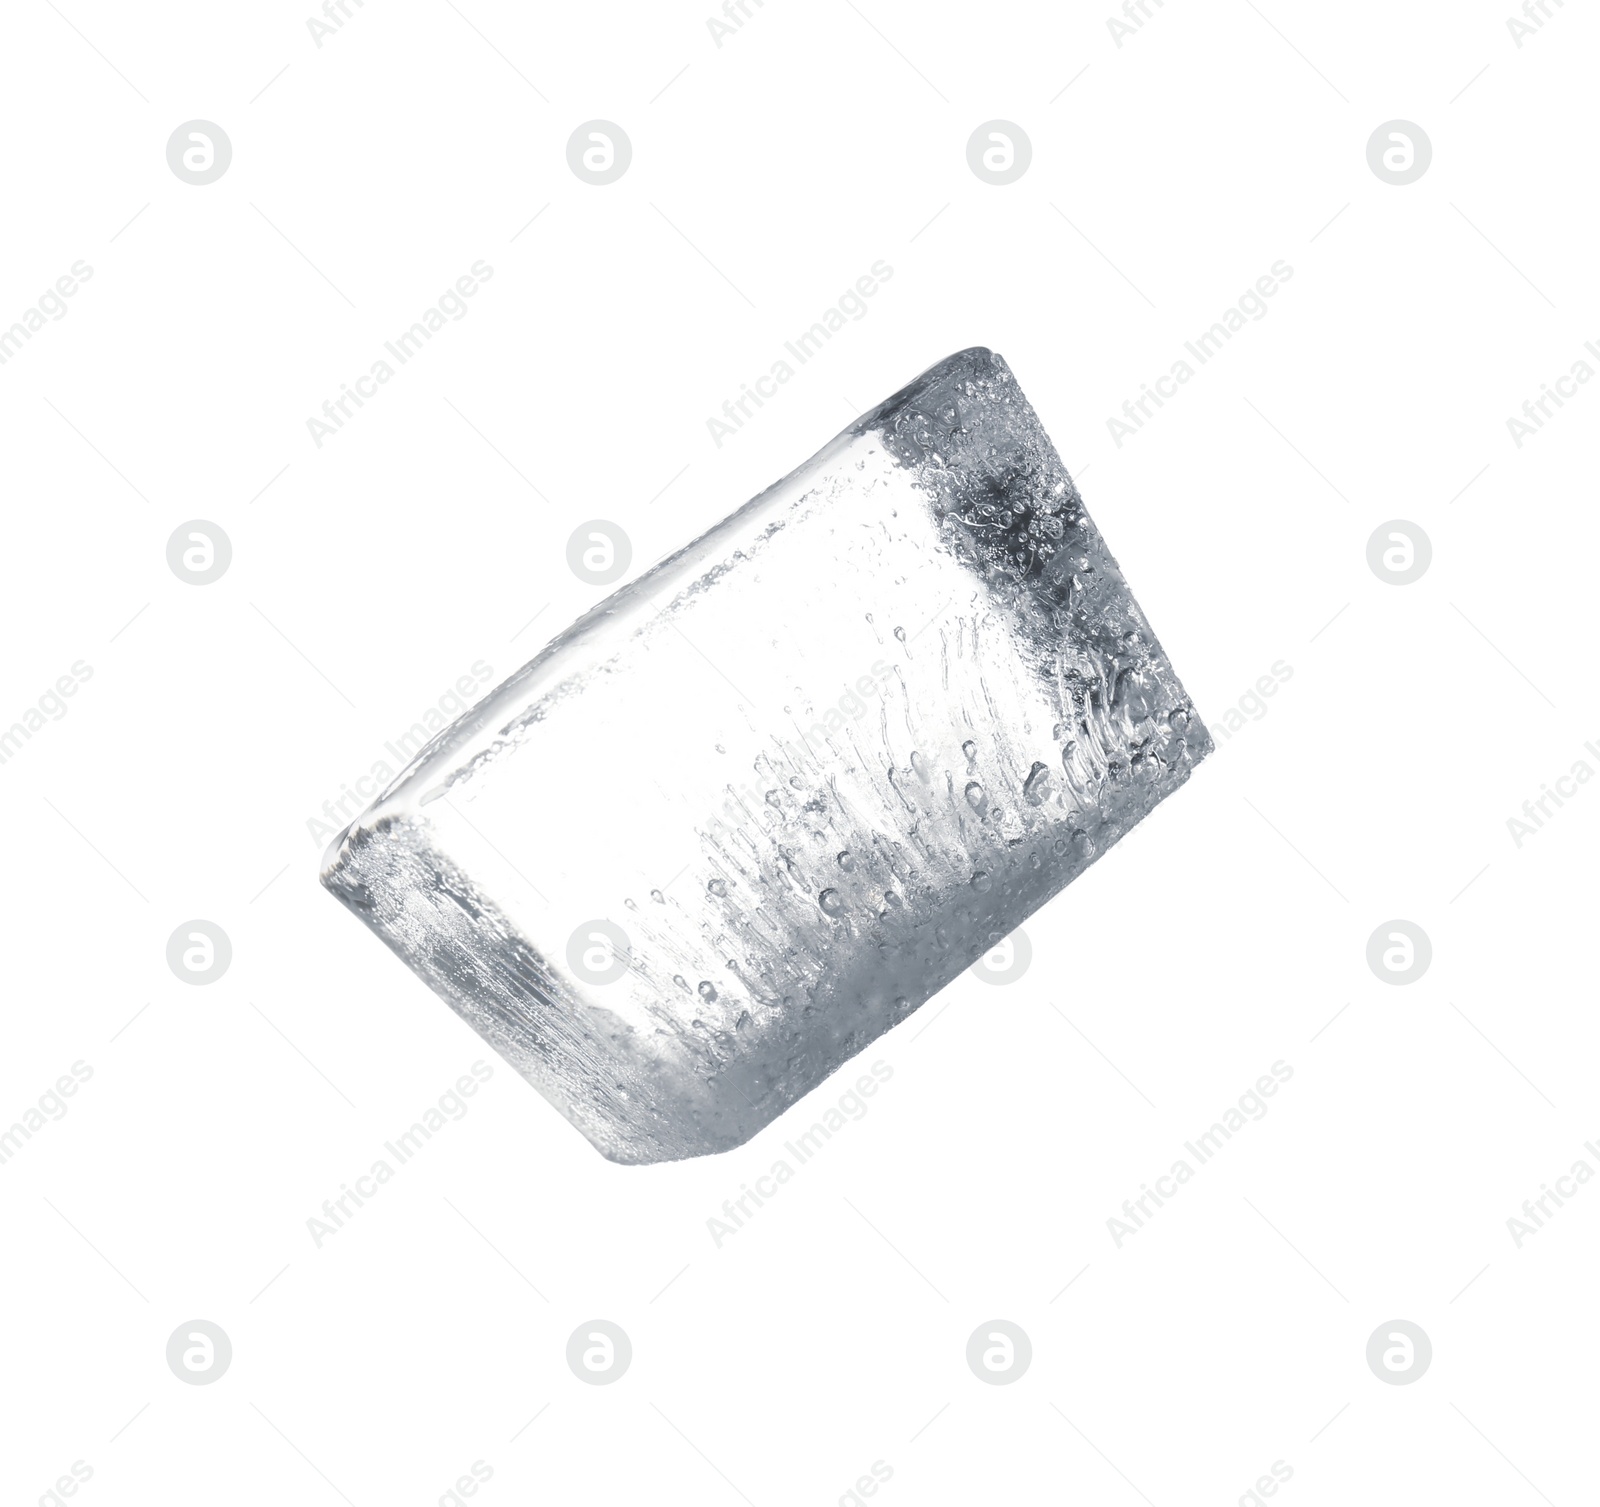 Photo of Crystal clear ice cube isolated on white